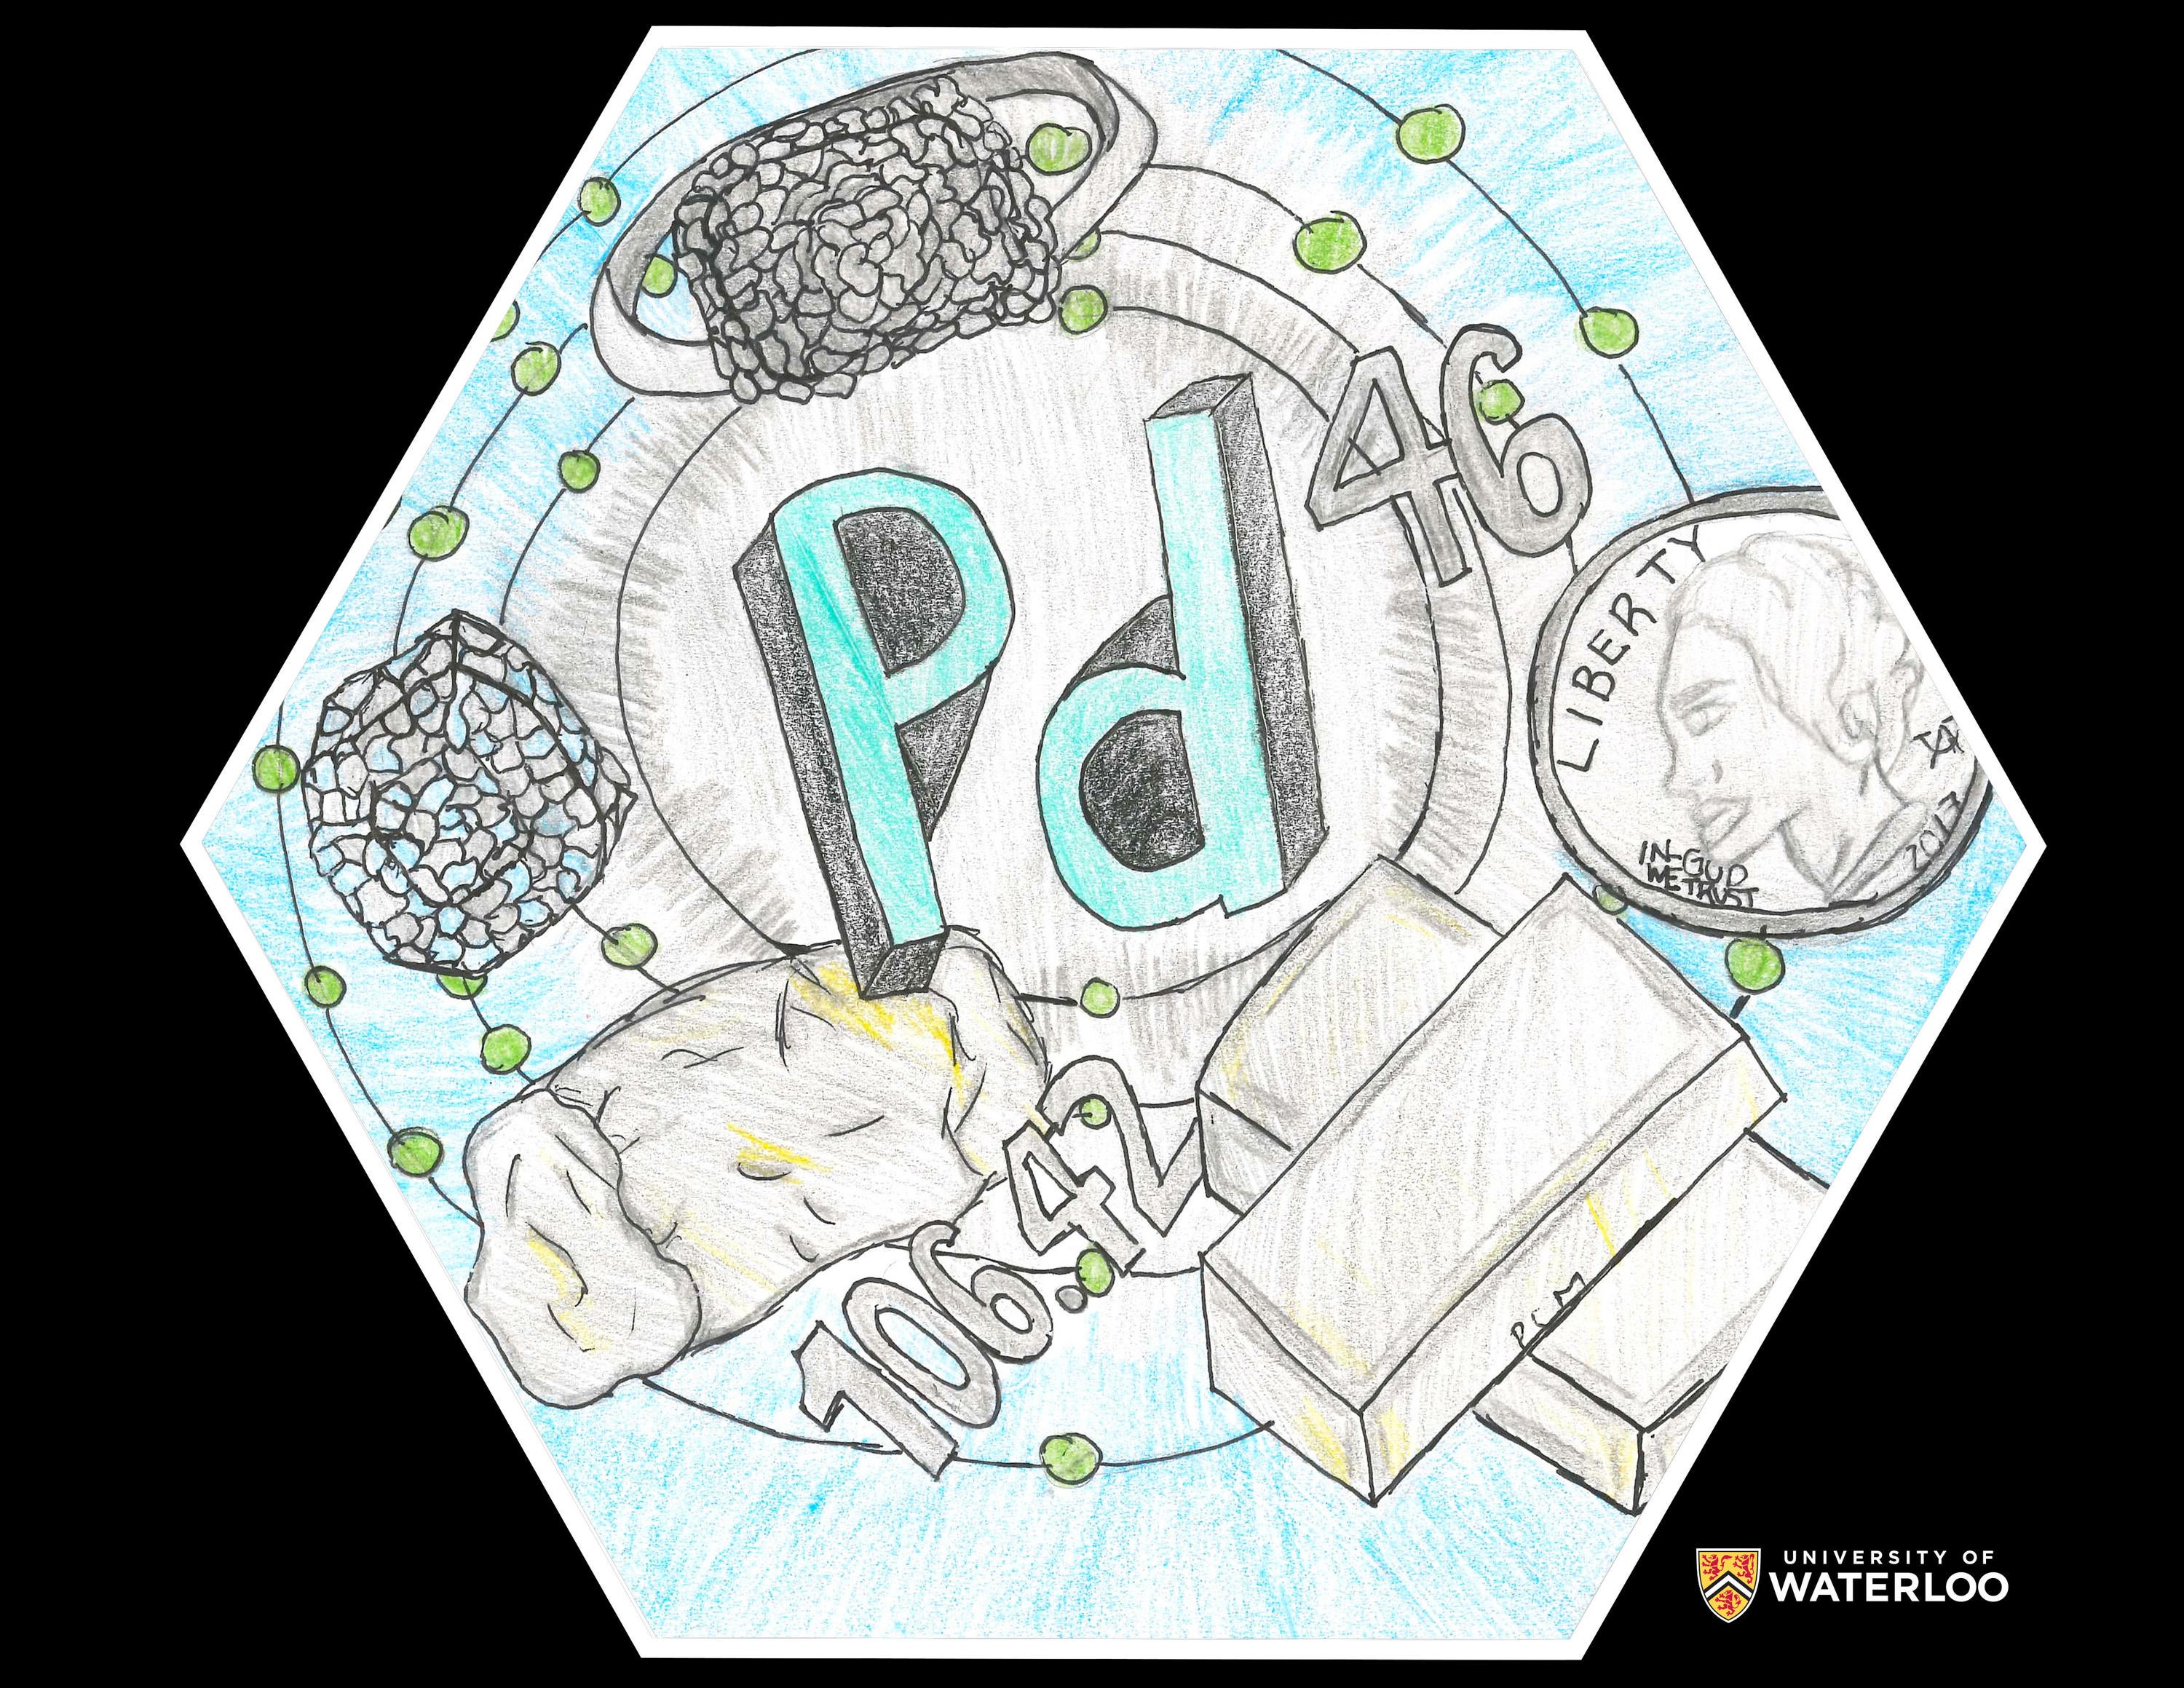 Coloured pencil and ink on white paper. Chemical symbol “Pd” in aquamarine sits in the centre of an atomic Bohr model. In the orbitals are “46” and “106.42”, along with an American quarter, a ring, refined bars of palladium and raw palladium.